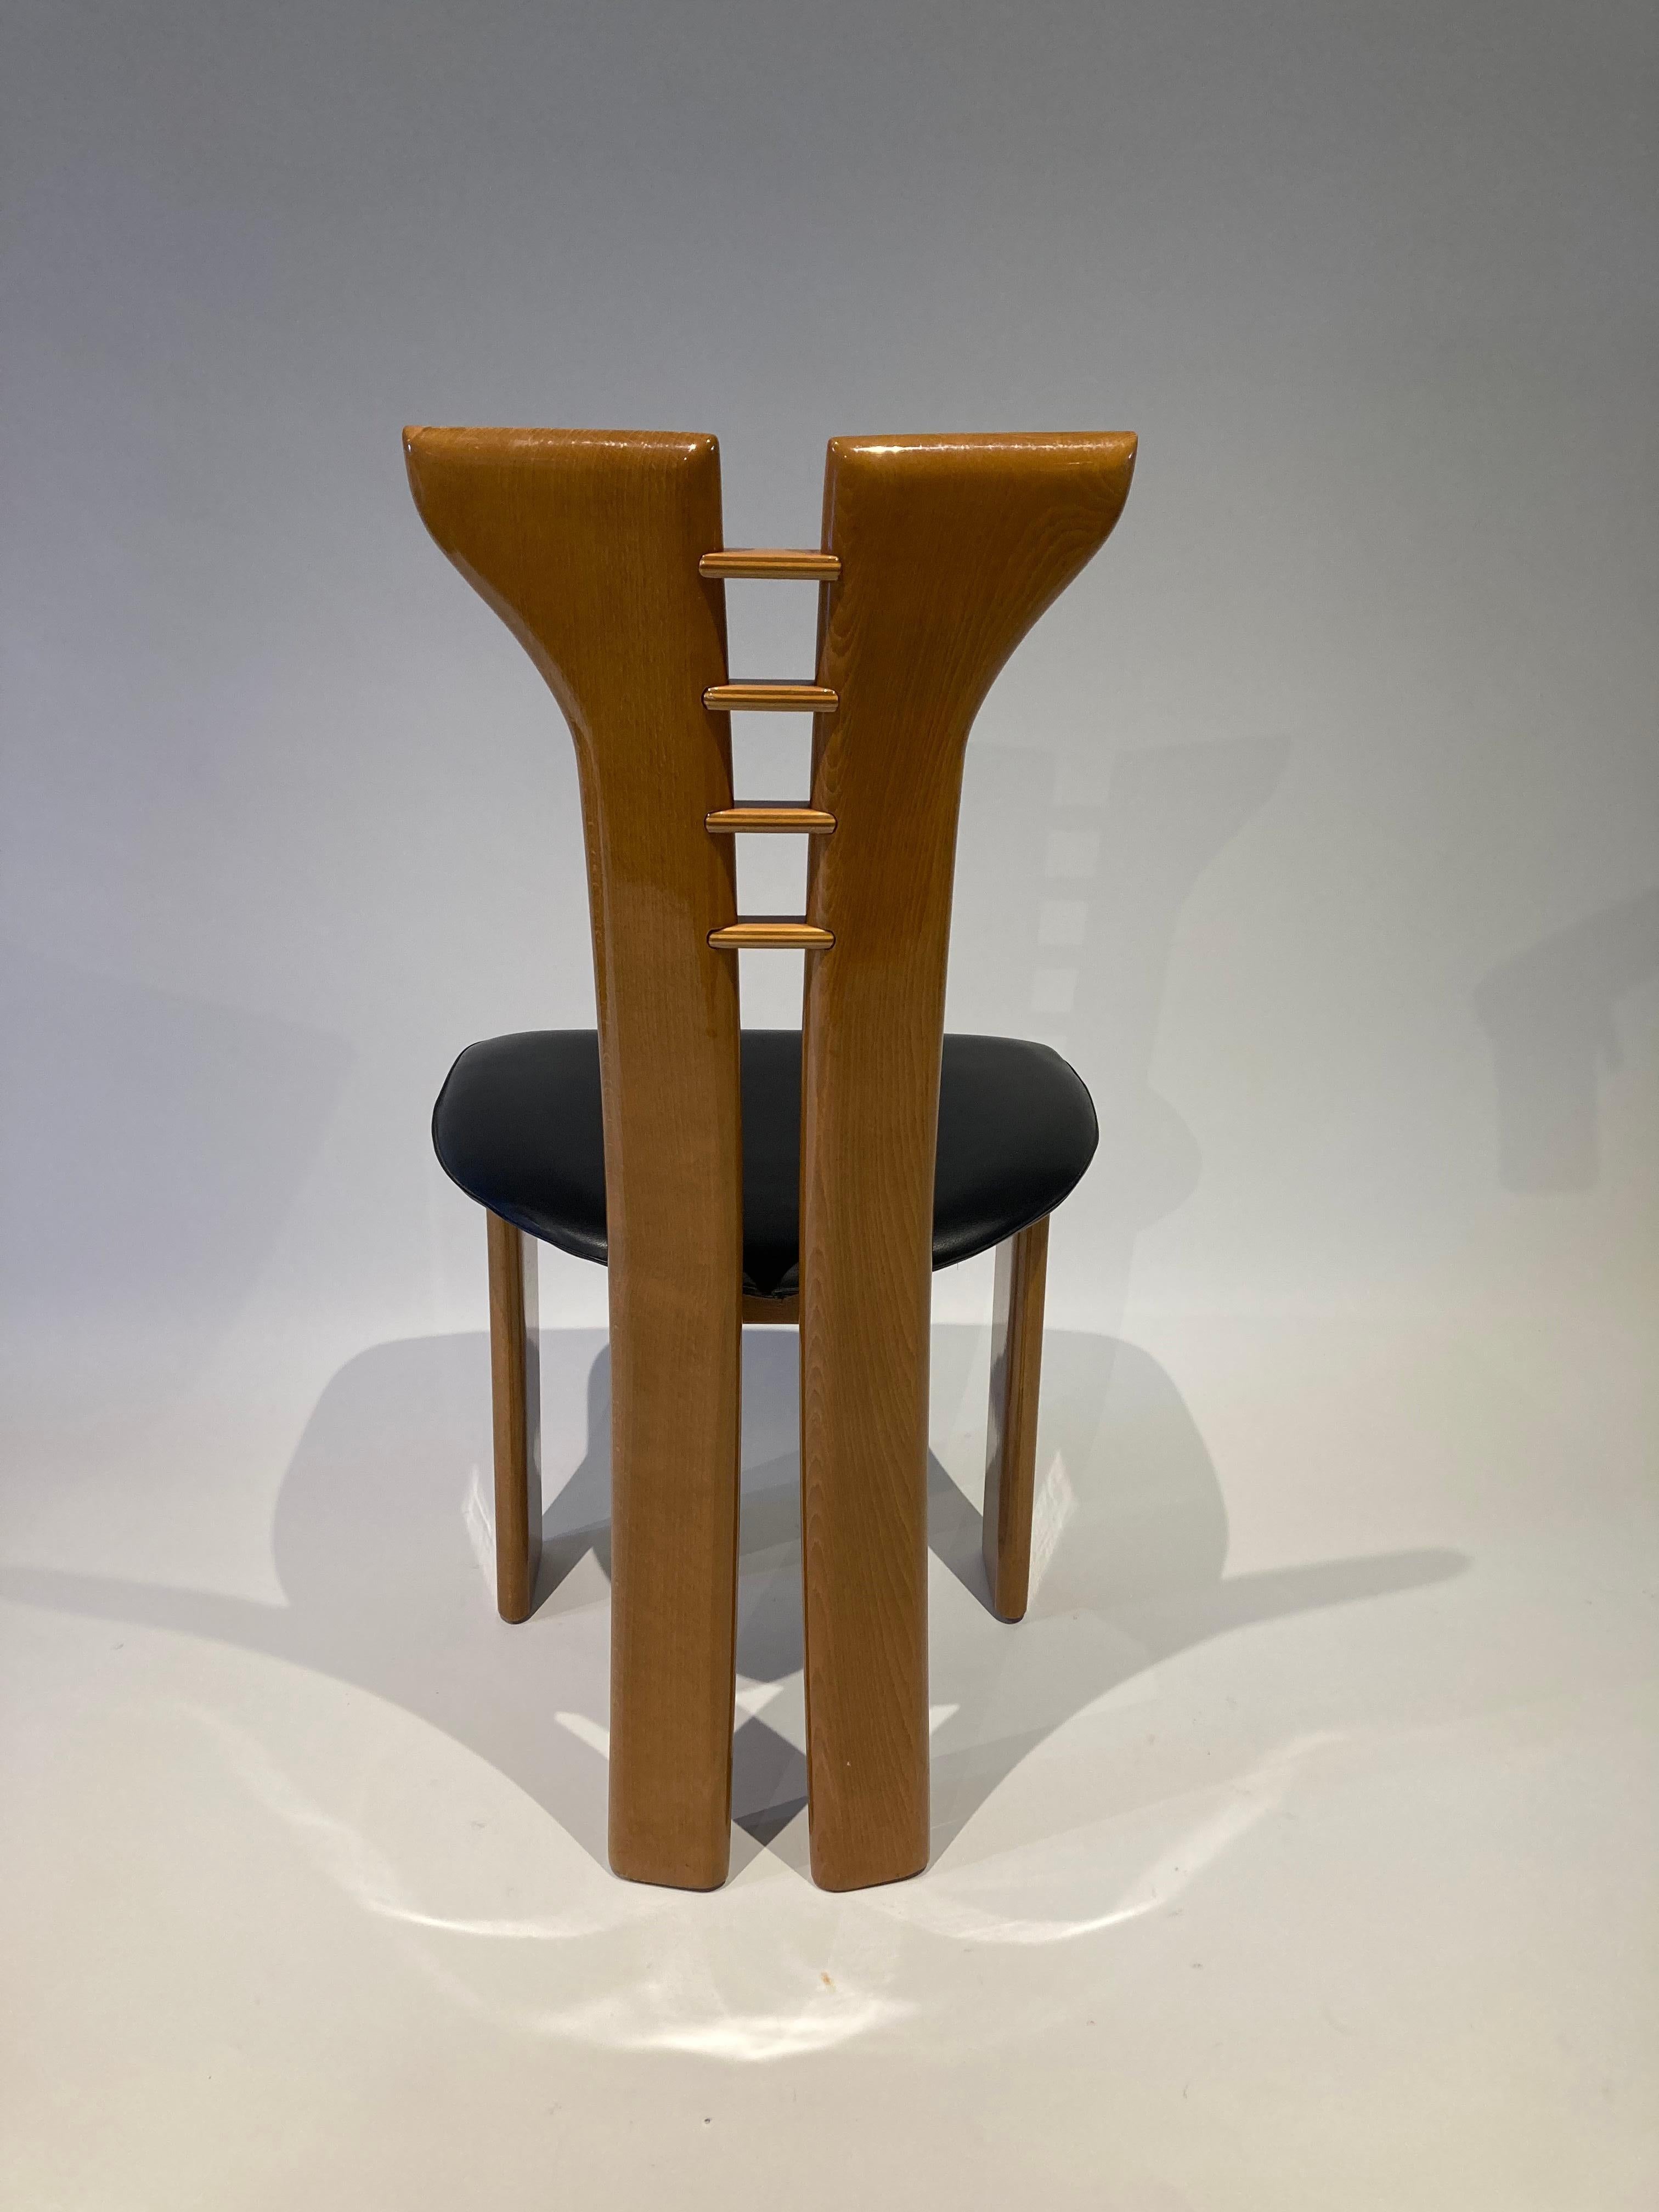 Incredible set of 6 sculptural dining chairs designed by Pierre Cardin.
We have 12 chairs available. We have them listed as two sets of 6.
This listing is for one full set of 6.